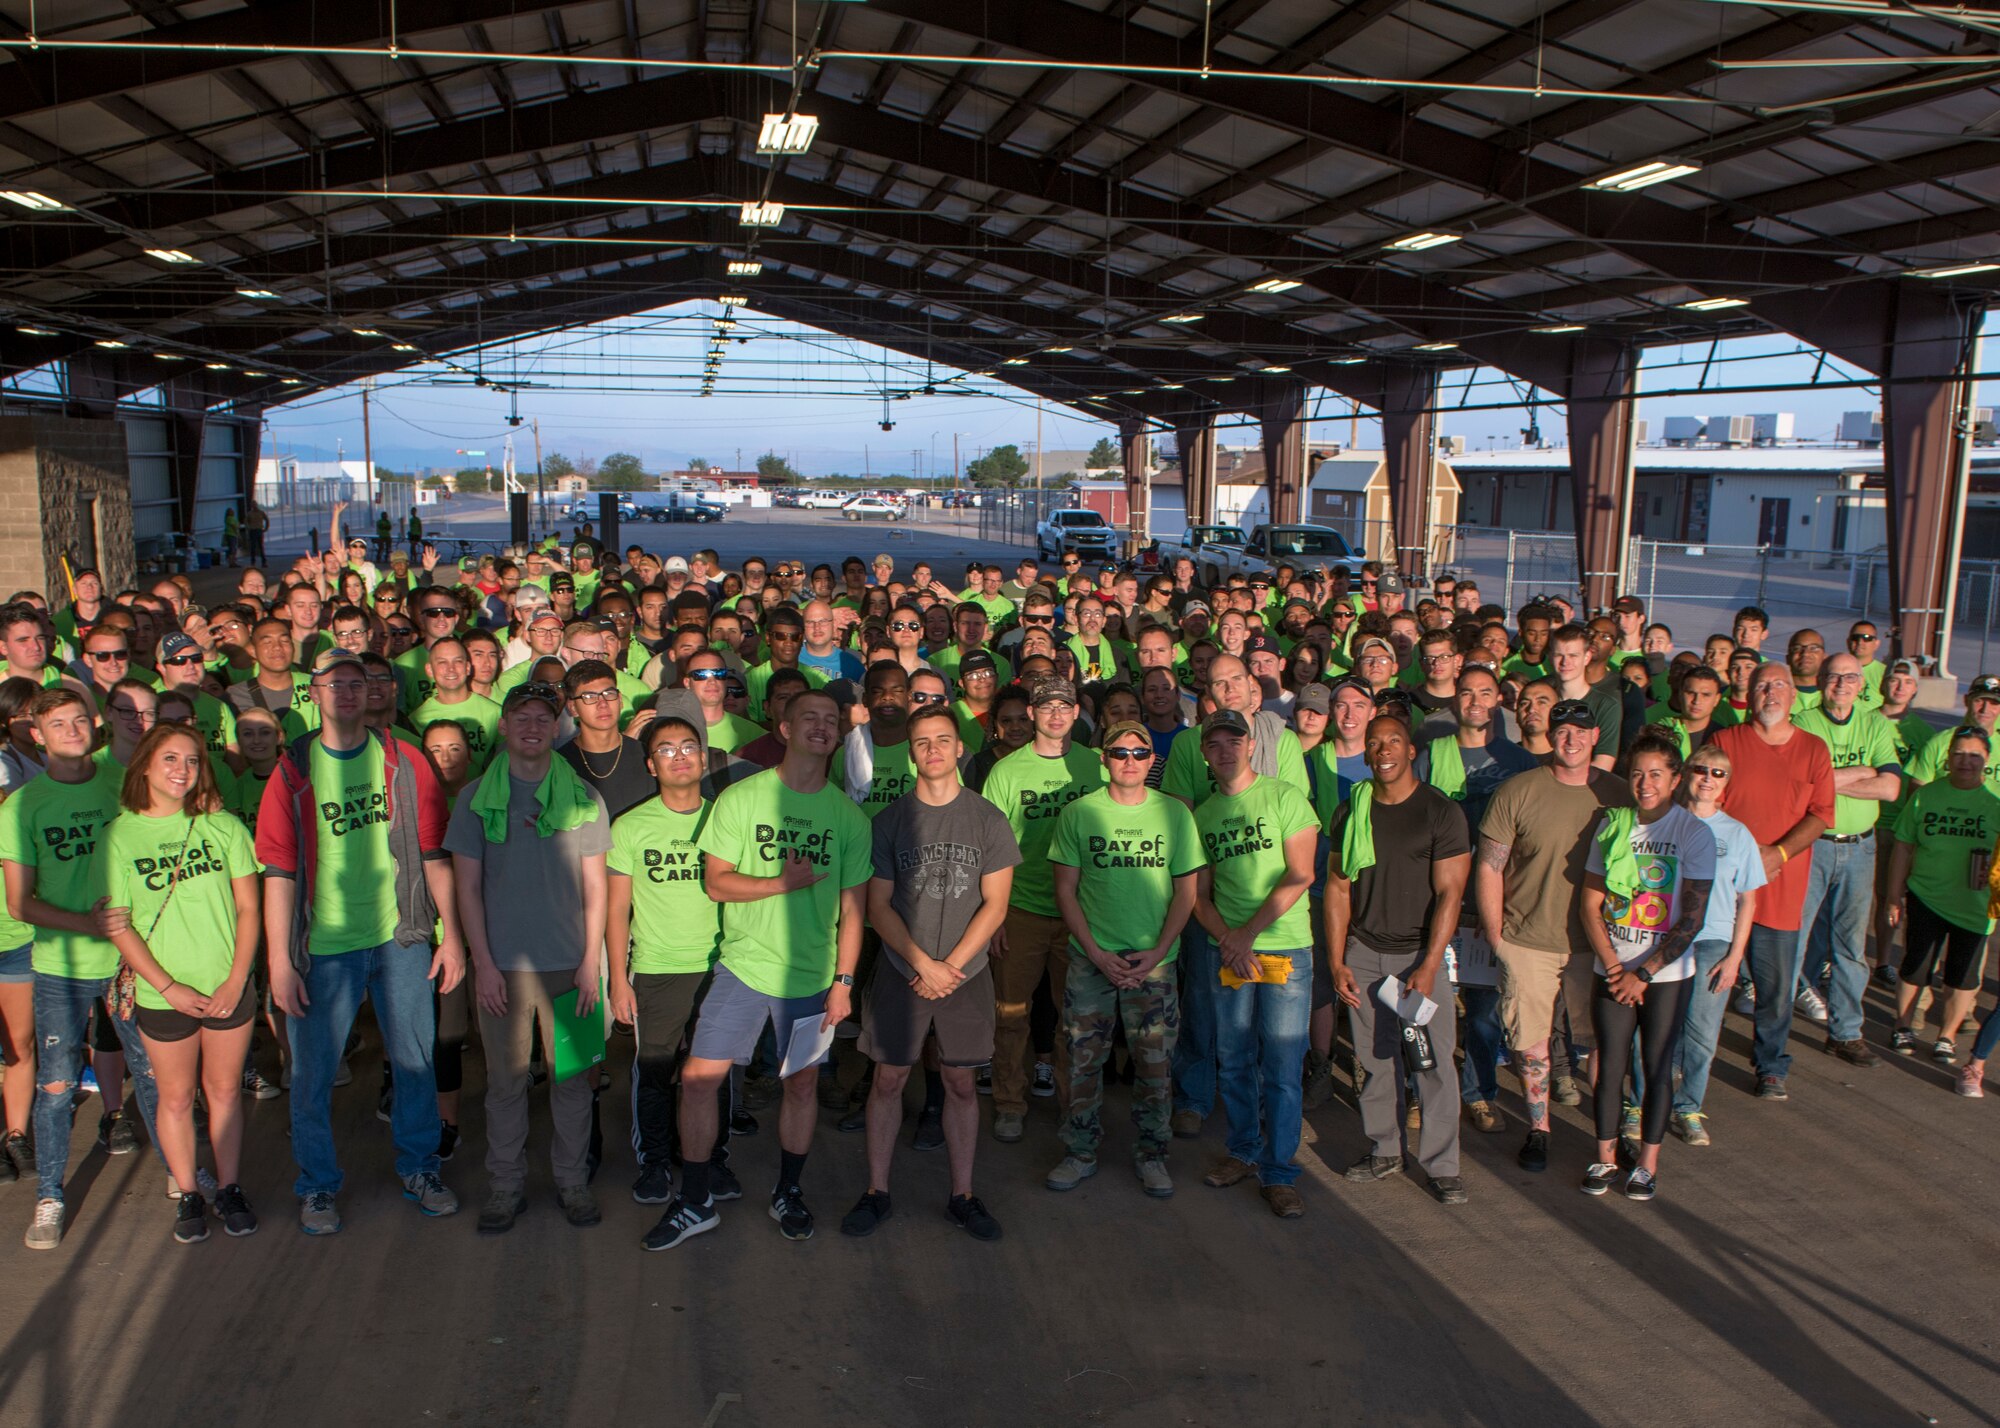 Volunteers from Holloman Air Force Base, N.M. and the local Otero County community pose a photo, Sept. 6, 2019, at the Otero County Fairgrounds in Alamogordo, N.M. Day of Caring volunteers performed various tasks, such as home repairs and yard work, at pre-determined job sites for individuals who are either unable to accomplish the tasks themselves or do not the resources to do so. (U.S. Air Force photo by Airman 1st Class Kindra Stewart)